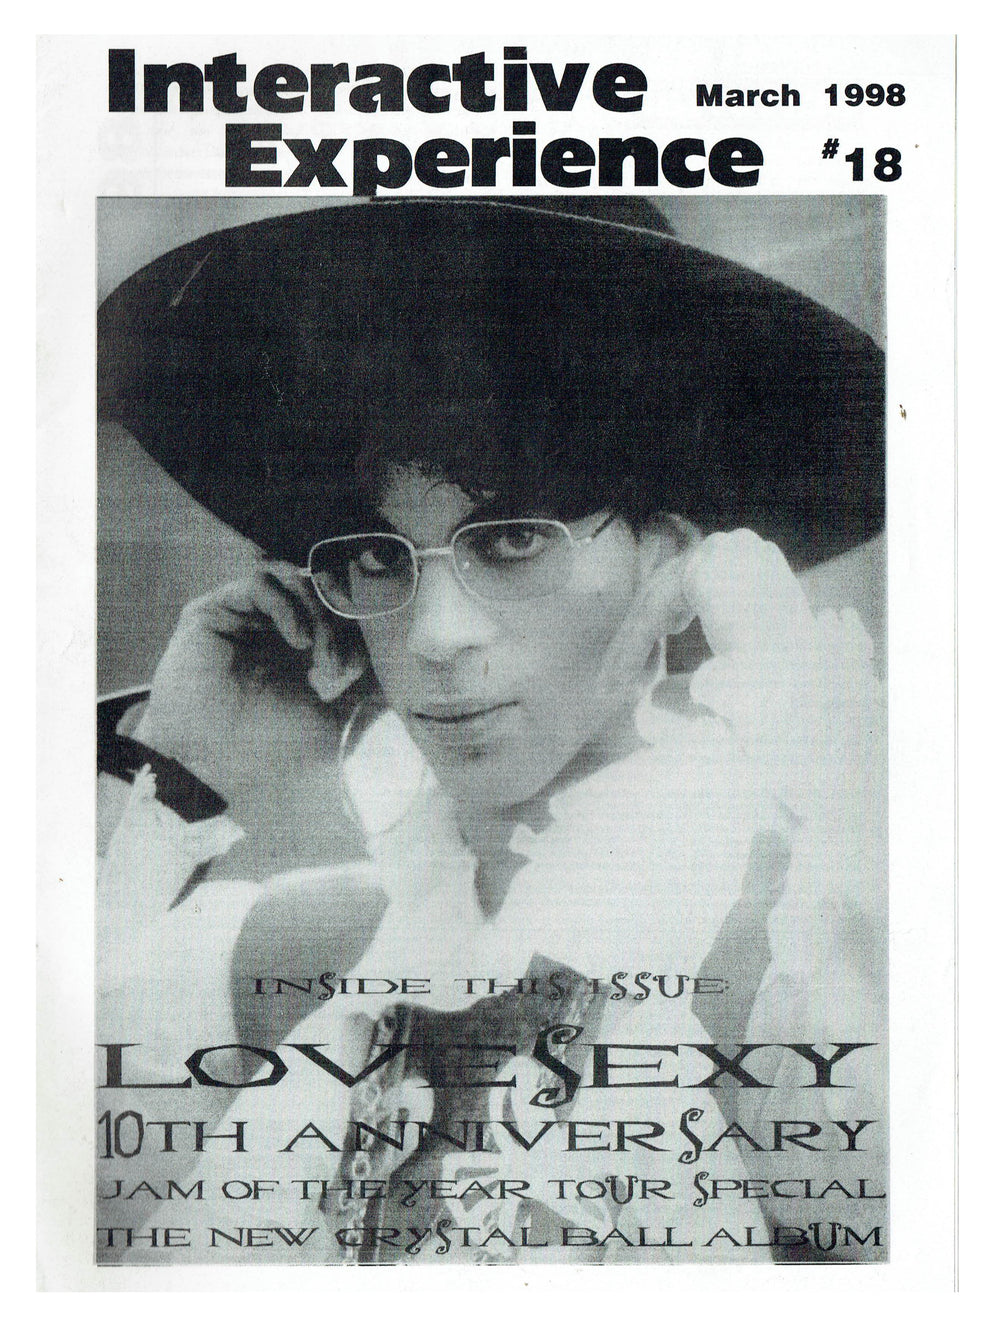 Prince – Interactive Experience Prince Fanzine Publication Issue 18 March 1998